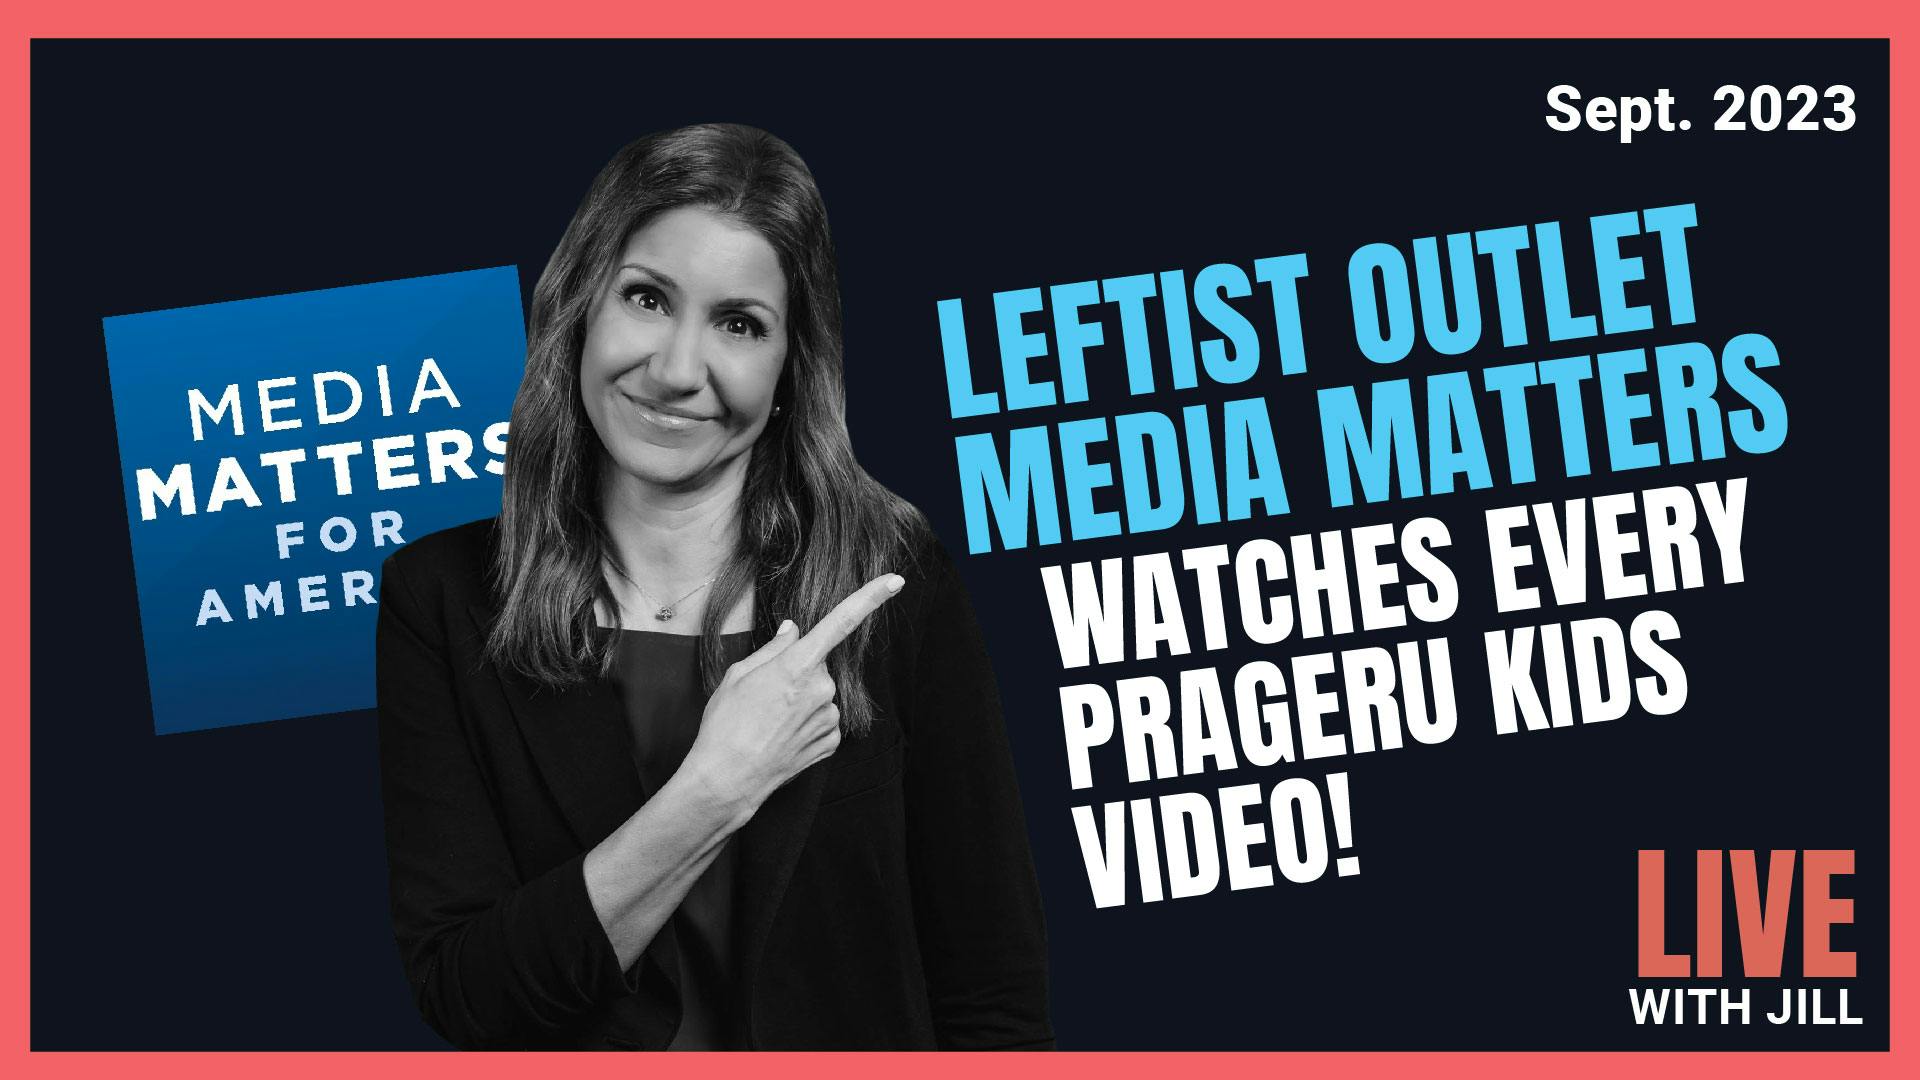 Leftist Outlet Media Matters Watches Every PragerU Kids Video!